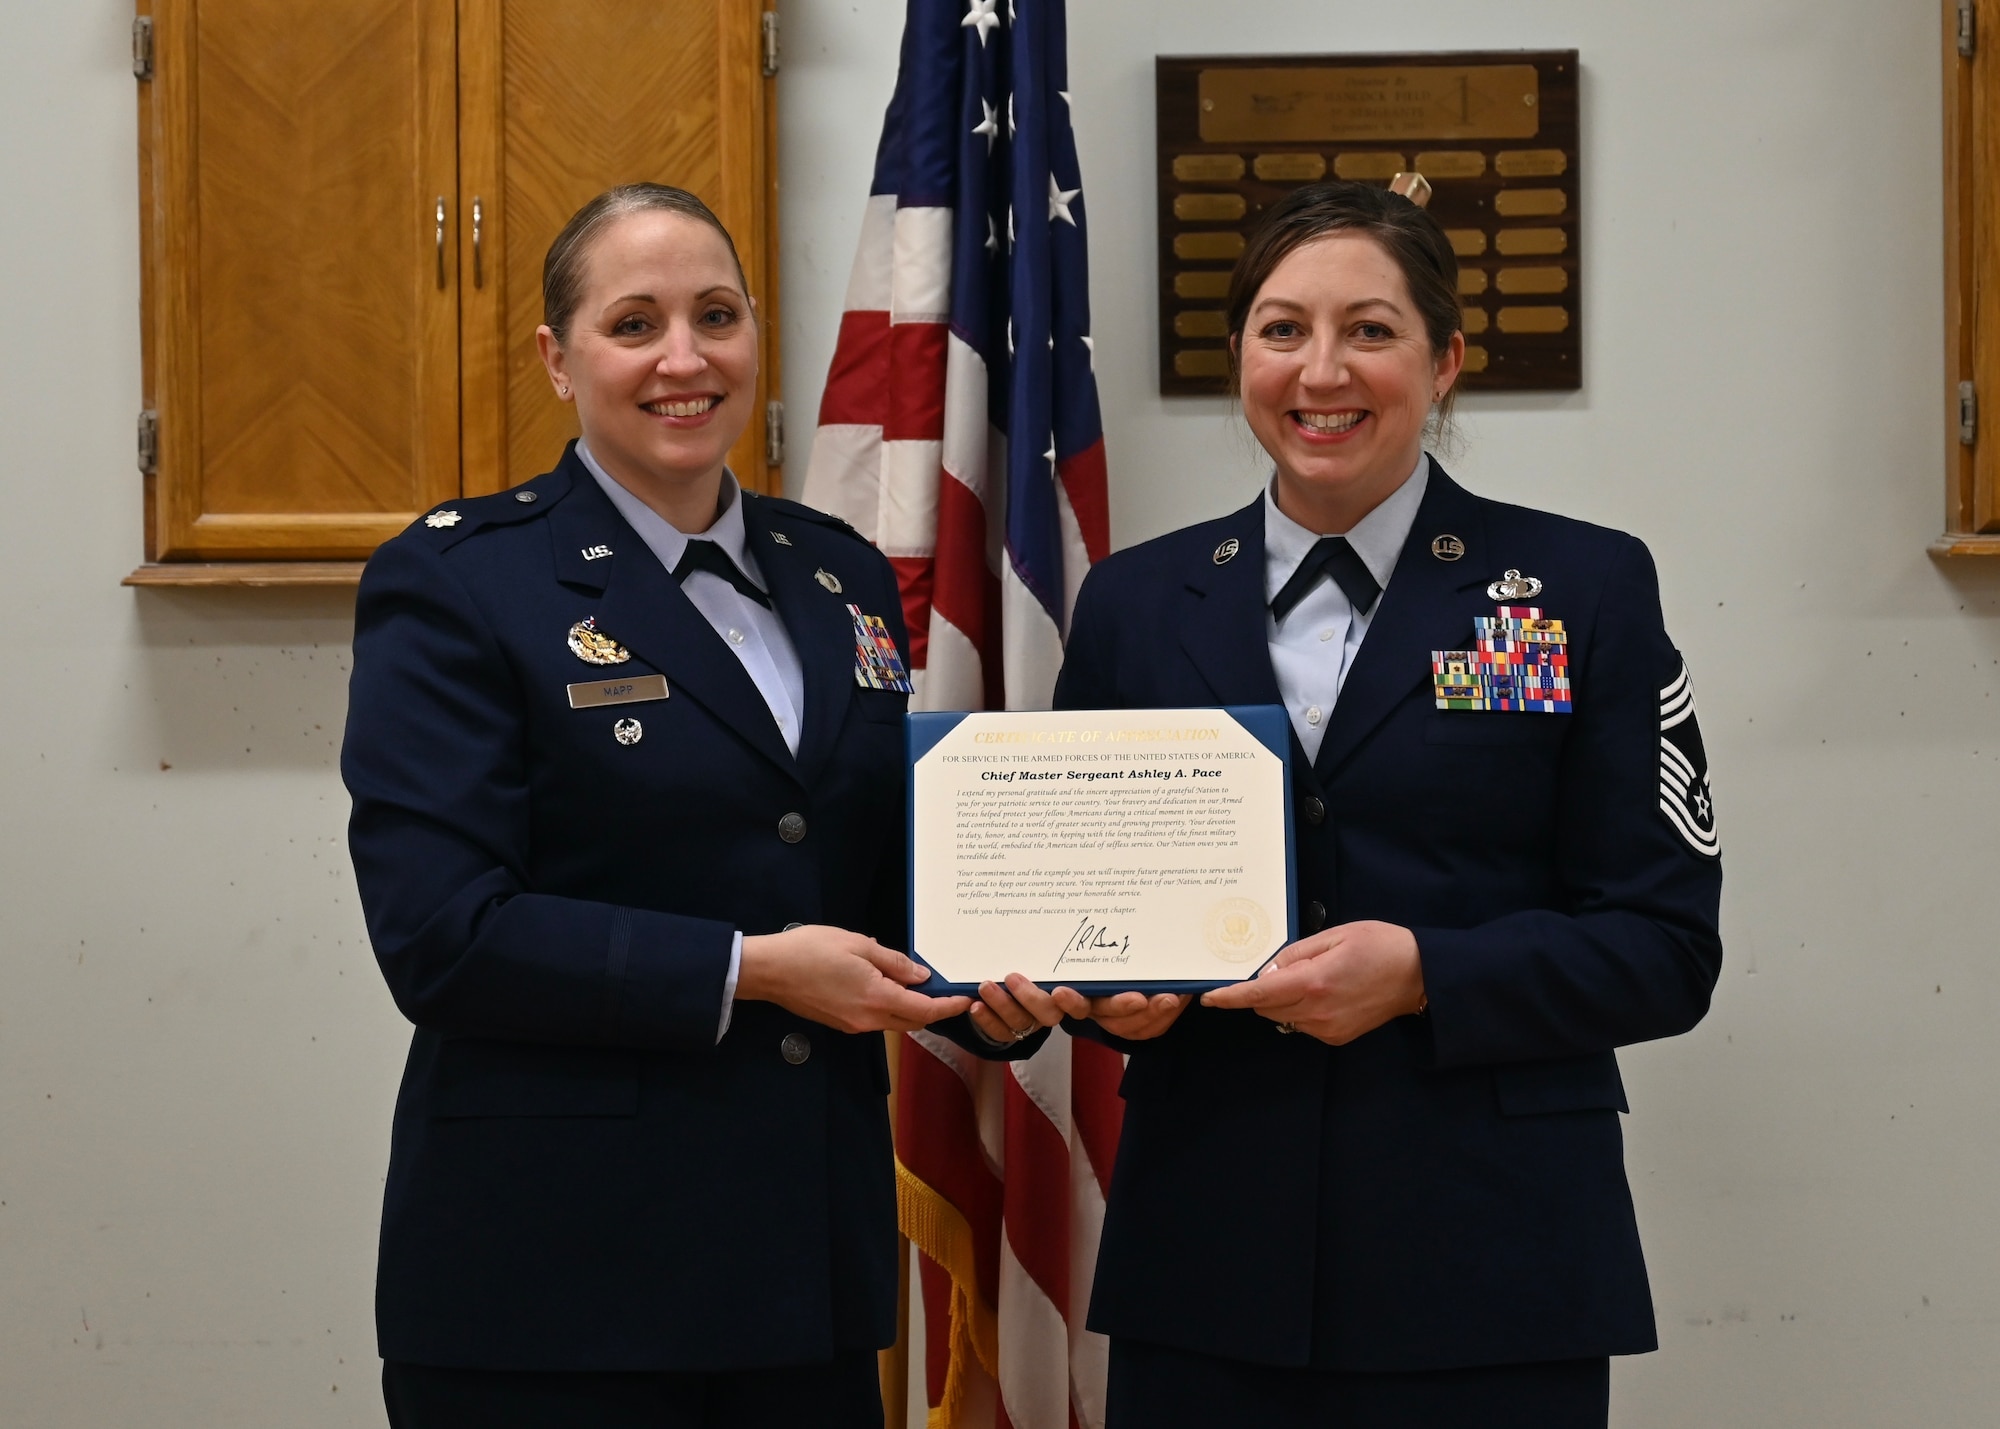 New York Air National Guard Chief Master Sgt. Ashley A. Pace (right) receives a Certificate of Appreciation from Lt. Col. Jennifer Mapp,  during a retirement ceremony held at Hancock Field Air National Guard Base, Syracuse, New York. (U.S. Air National Guard photo by Staff Sgt. Duane Morgan)